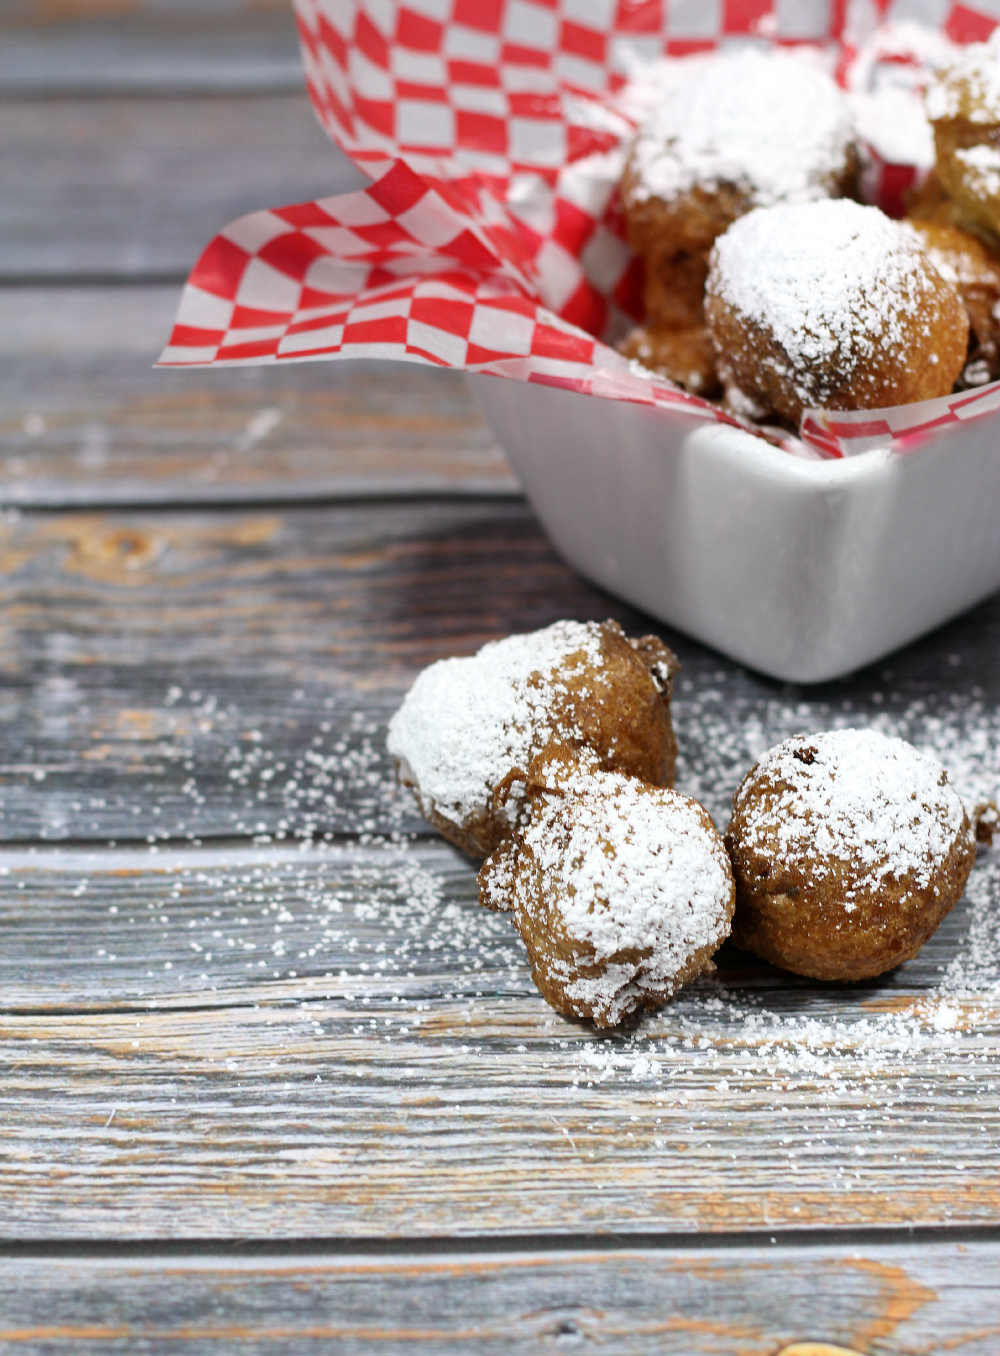 Grab your jar of Nutella and your fryer and whip up these fun state fair inspired Nutella Fritters